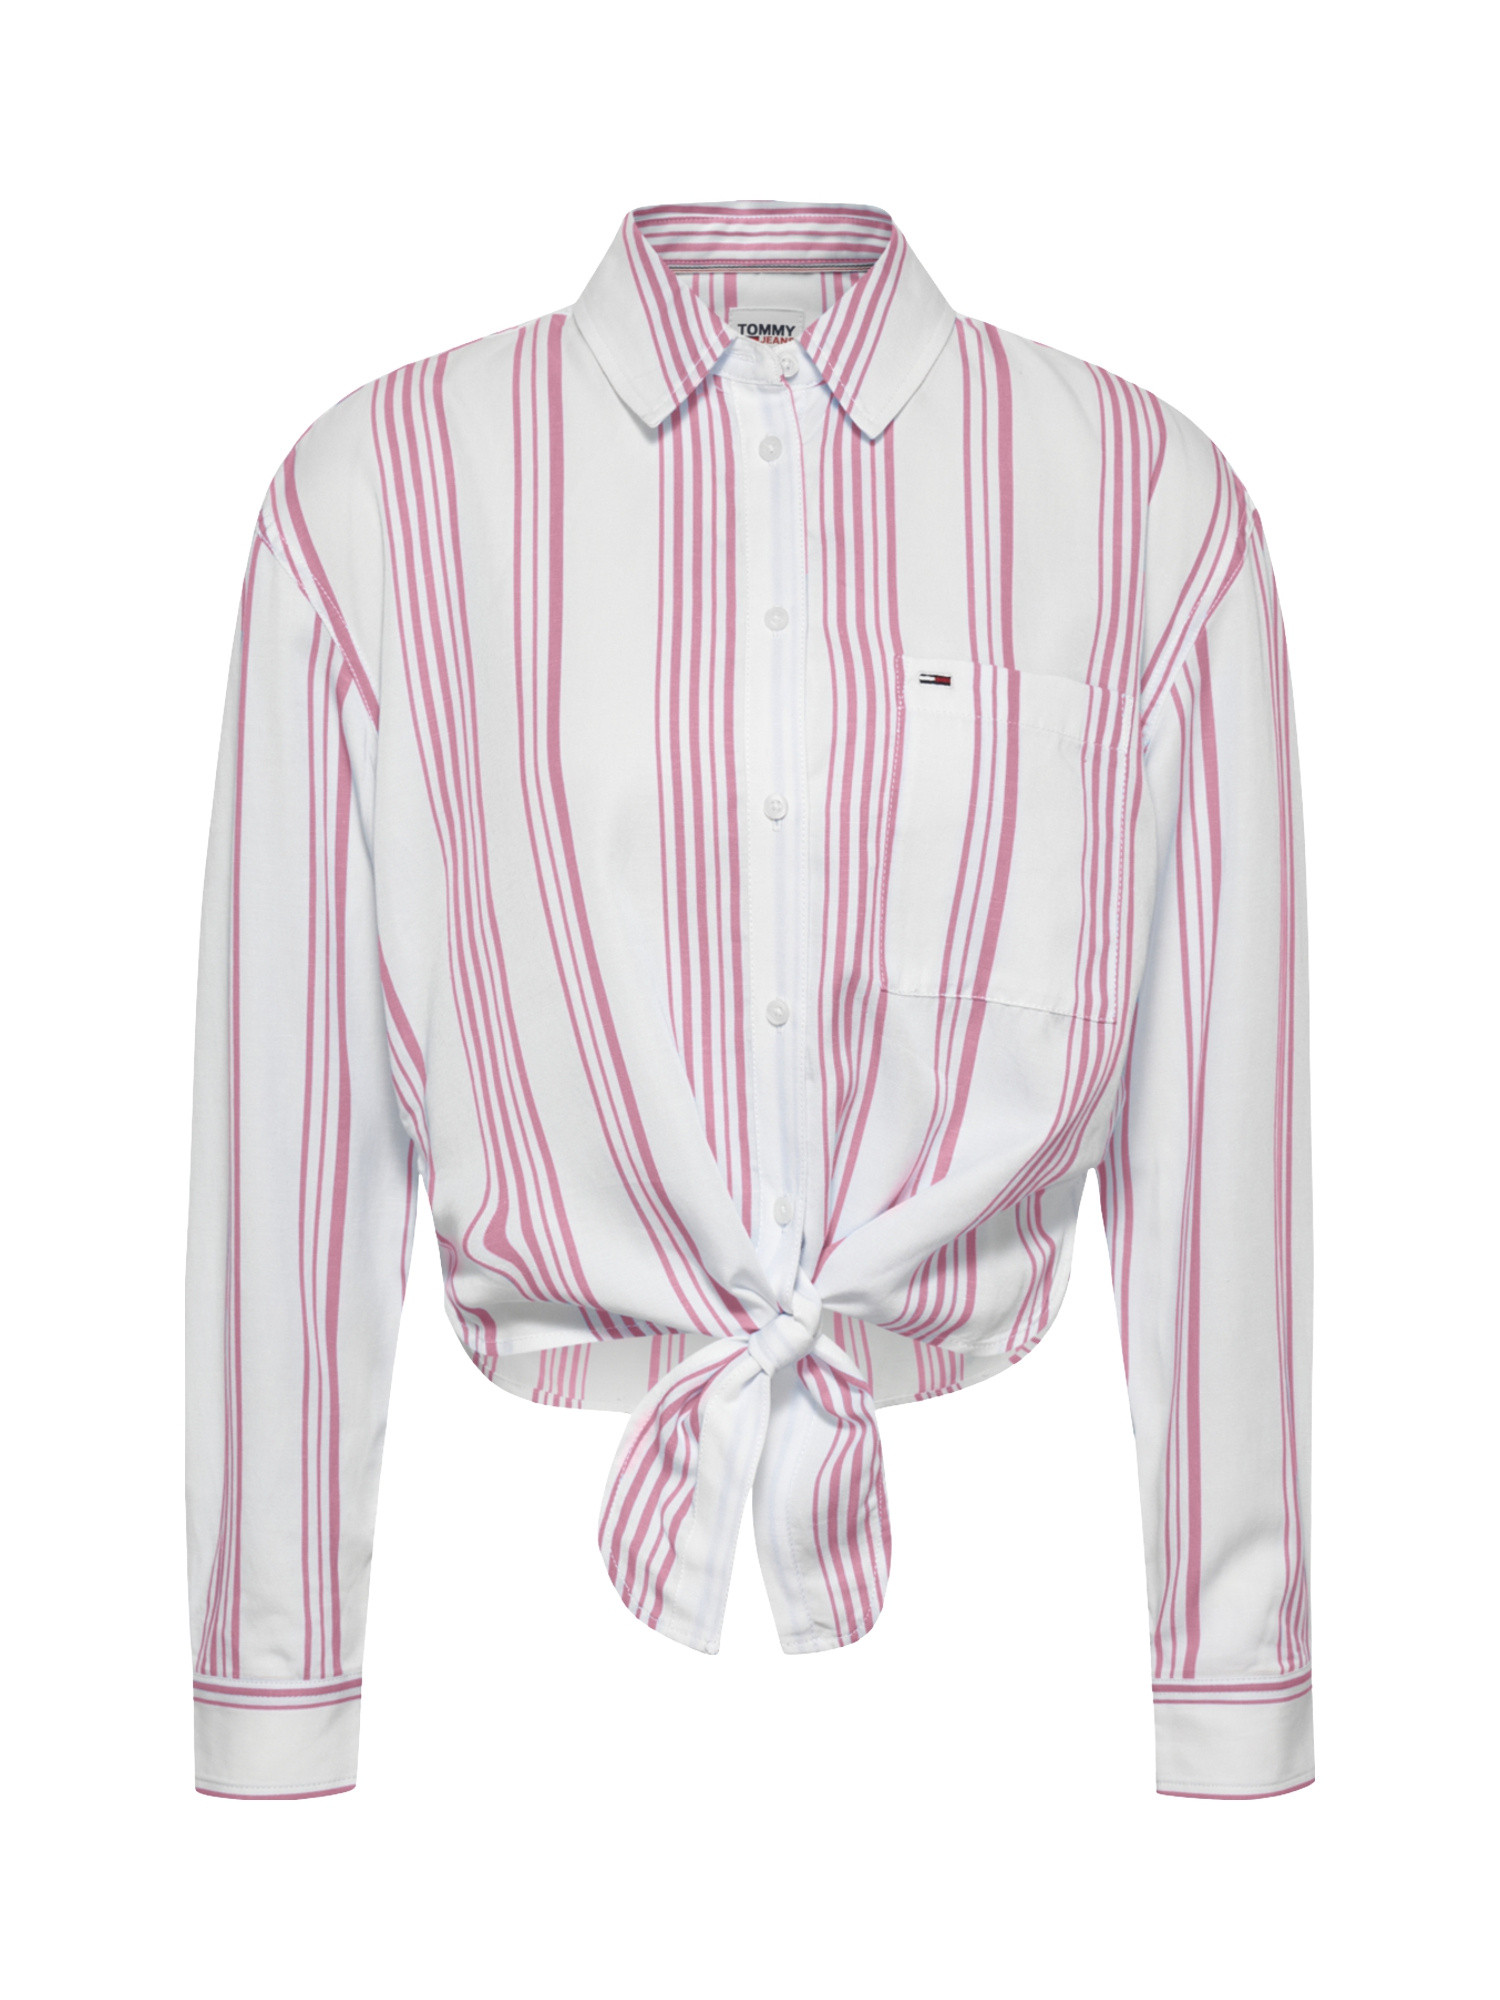 Camicia stampa a righe, Rosa, large image number 0